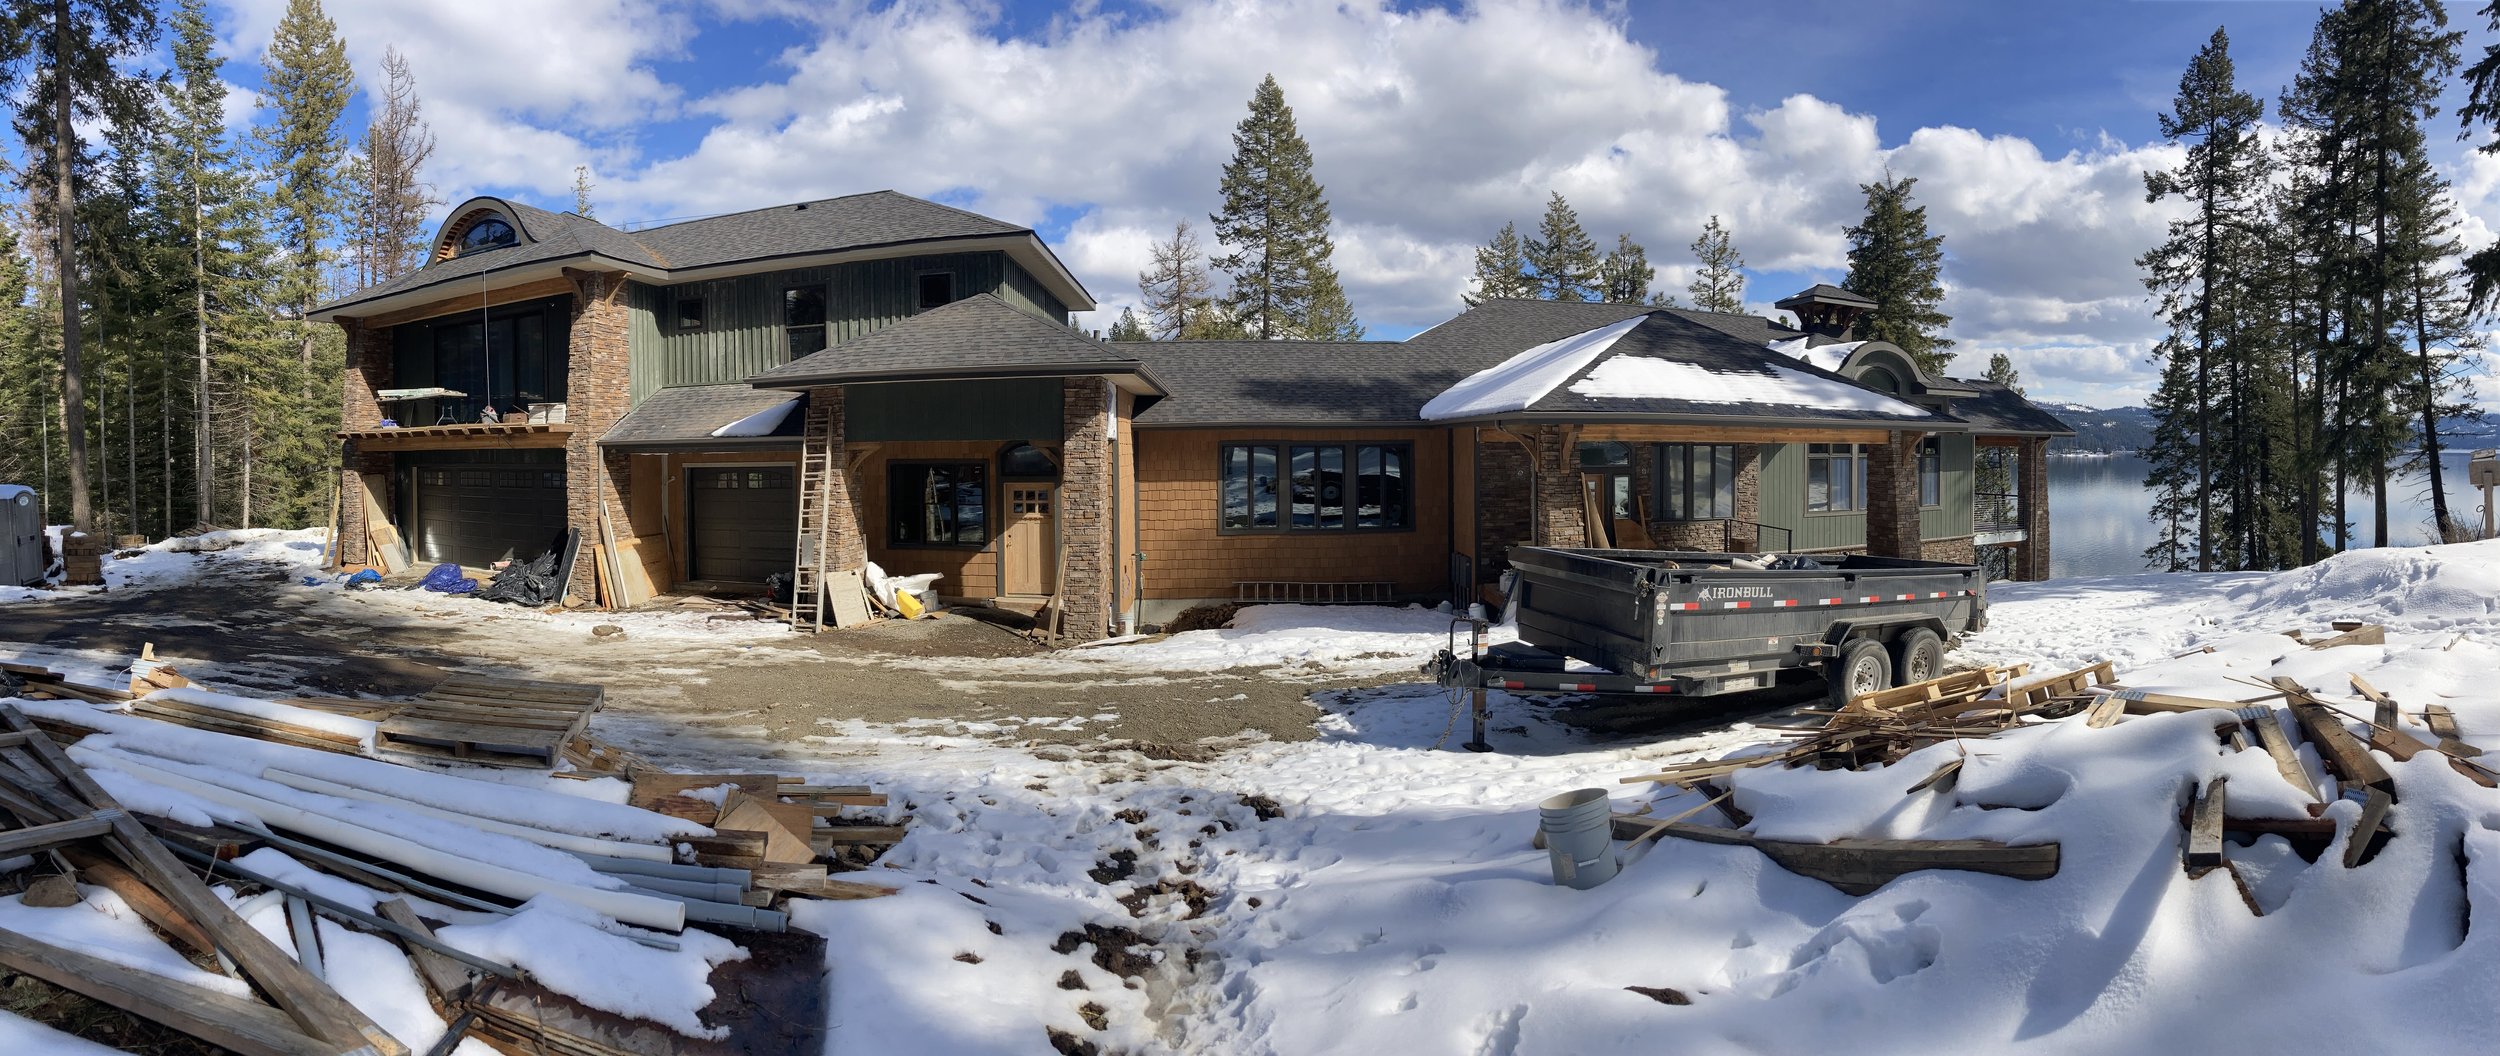 NORTH-GARDEN-LODGE-UPDATE-where-we-are-today